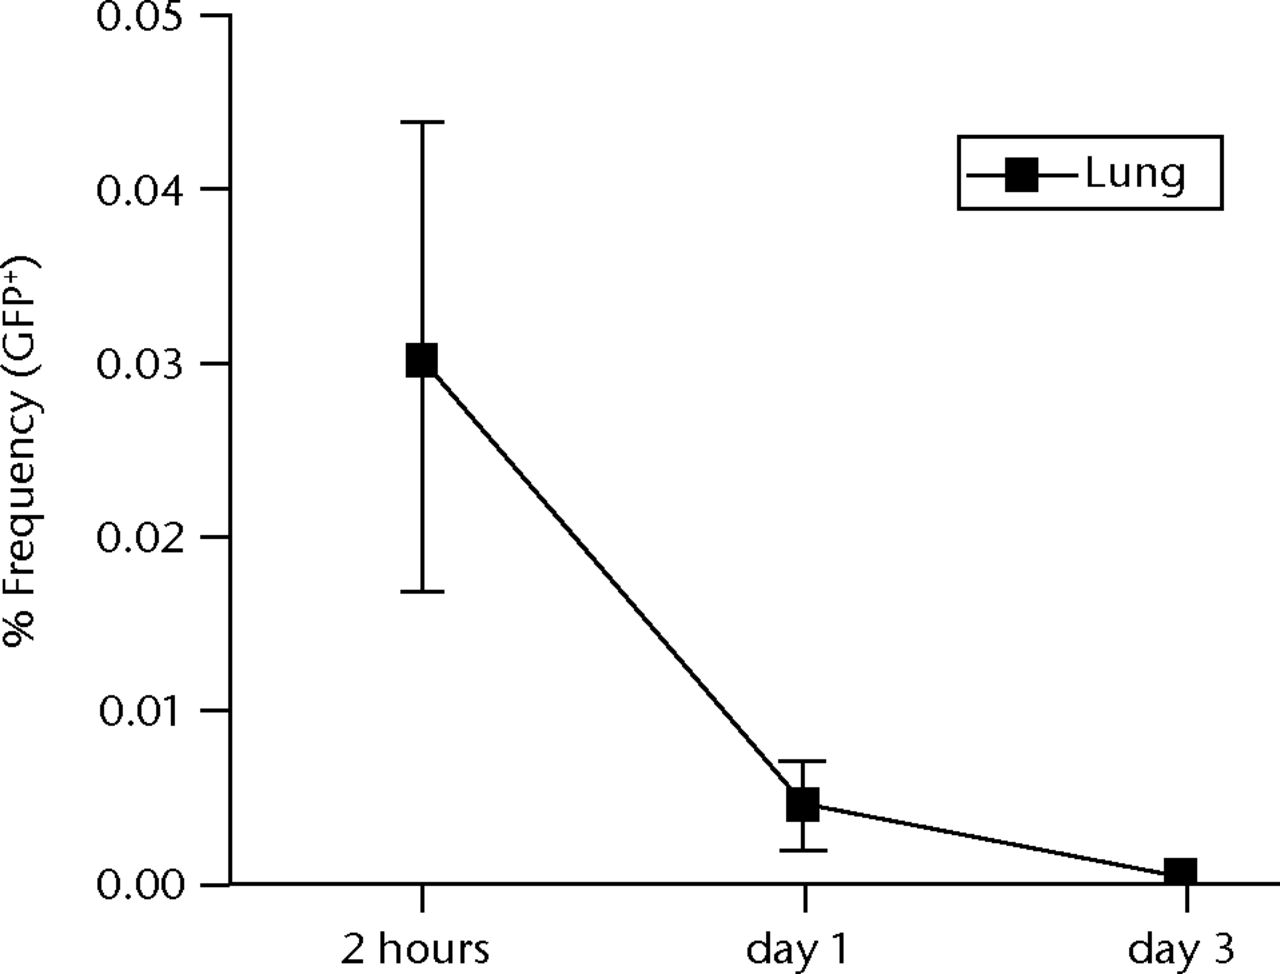 Figs. 5a - 5d 
          
            Figure 5a – Graph showing percentage
of GFP-positive cells in lung at two hours, one and three days after intravenous
infusion (n = 4 or 5 each). Values are presented as standard error
of the mean (SEM). Figure 5b – Graph showing percentage of GFP-positive
cells in BM, PB, liver, spleen and brain at two hours, one and three days
after intravenous infusion (n = 4 or 5 each). Values are presented
as standard error of the mean (SEM). Figure 5c – Representative
macroscopic images of the GFP expression in lung (left) and liver
(right) at two hours (i.v.-2h) and three days (i.v.-3d) after intravenous
infusion. PBS without osteoblast-like cells was used as a negative control,
whereas GFP-Tg rat was used as a positive control. Nuclei were stained with
DAPI. Figure 5d – Bar graph showing quantification of the GFP gene
by real-time PCR. Copy numbers of GFP were normal to that of GAPDH.
PBS was used as a negative control (NC), whereas GFP-Tg rat was
used as a positive control (PC). Values are presented as standard
error of the mean (SEM).
        